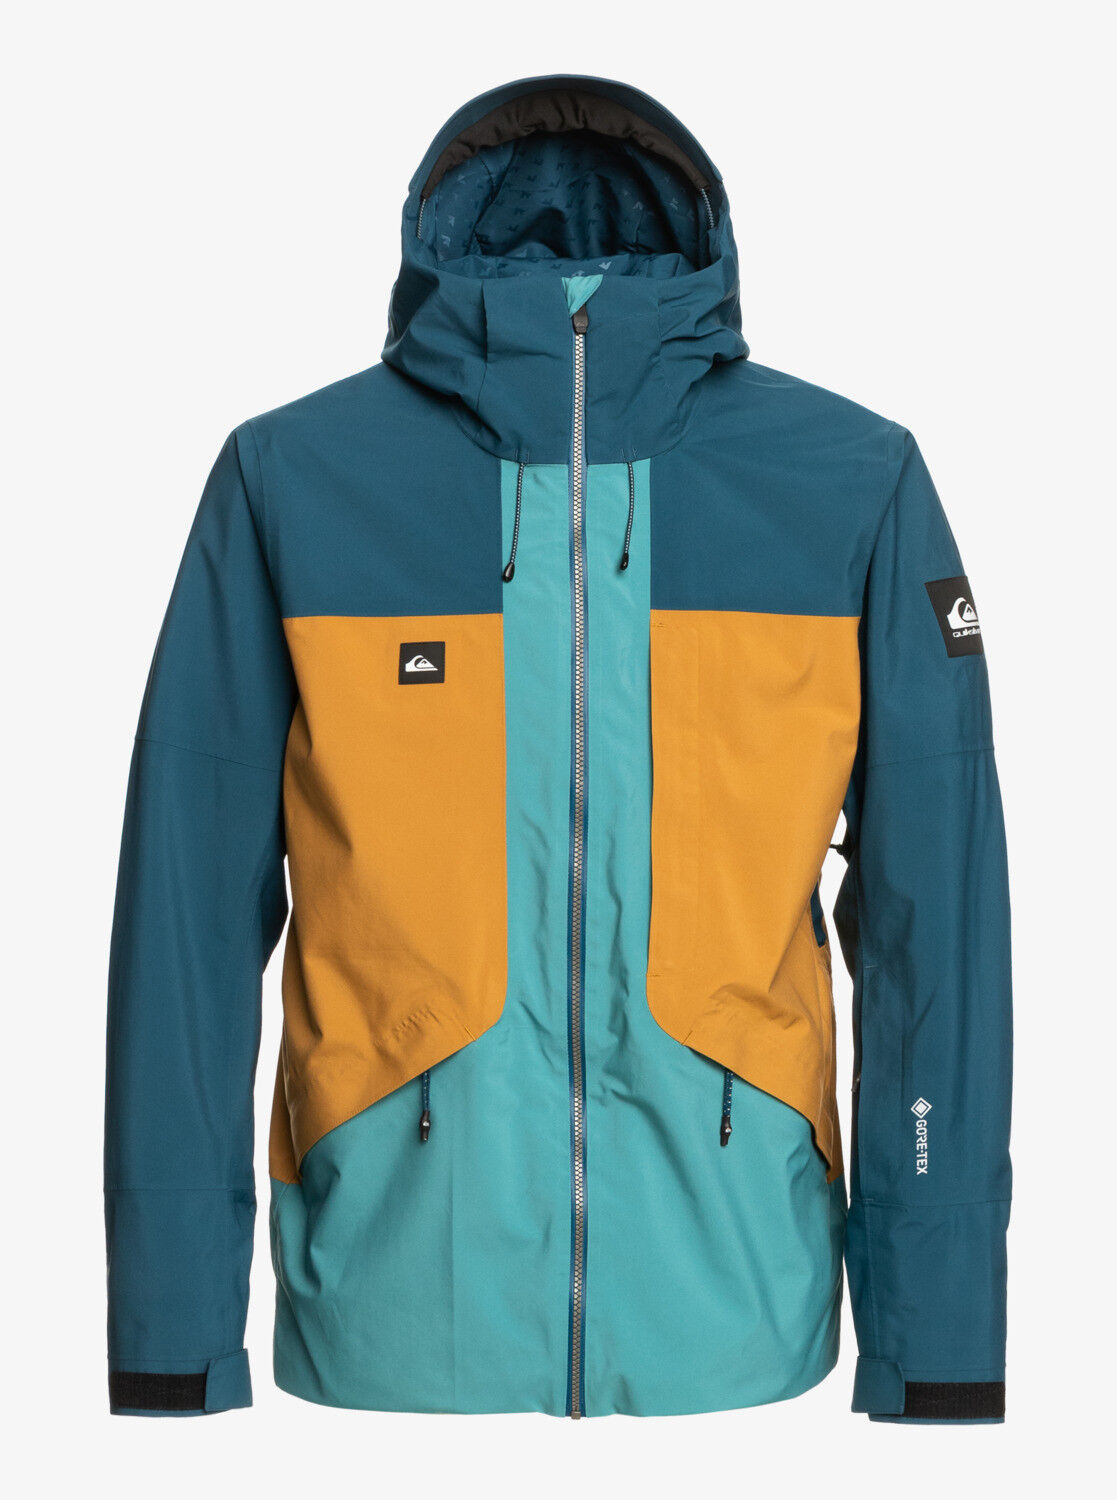 Quiksilver Forever Stretch Gore-Tex Jacket - Giacca da sci - Uomo | Hardloop